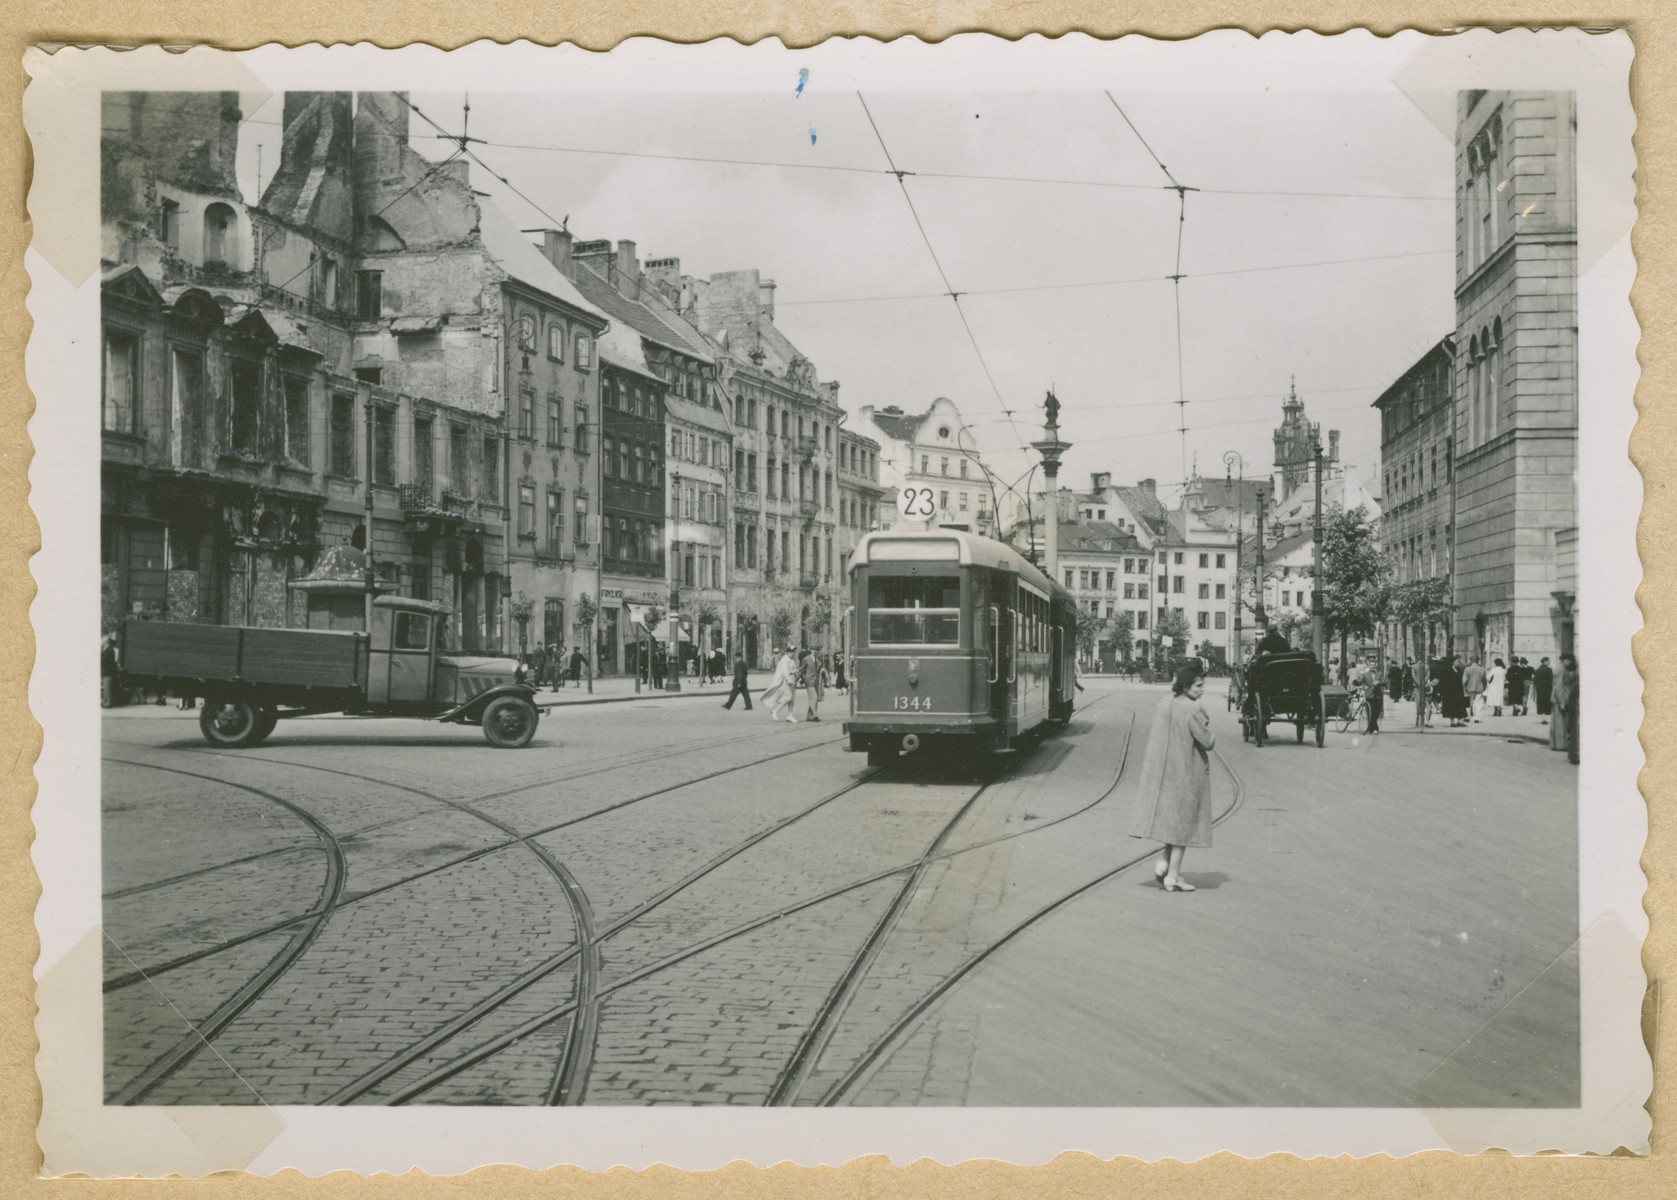 A streetcar on Krakowskie Przedmiescie in Warsaw.

The Krakowskie Przedmiescie is one of the oldest  and most prominent avenues in Warsaw, surrounded by historic palaces, churches, and manor houses.  Zygmunt's Column is visible near the center of the photograph.